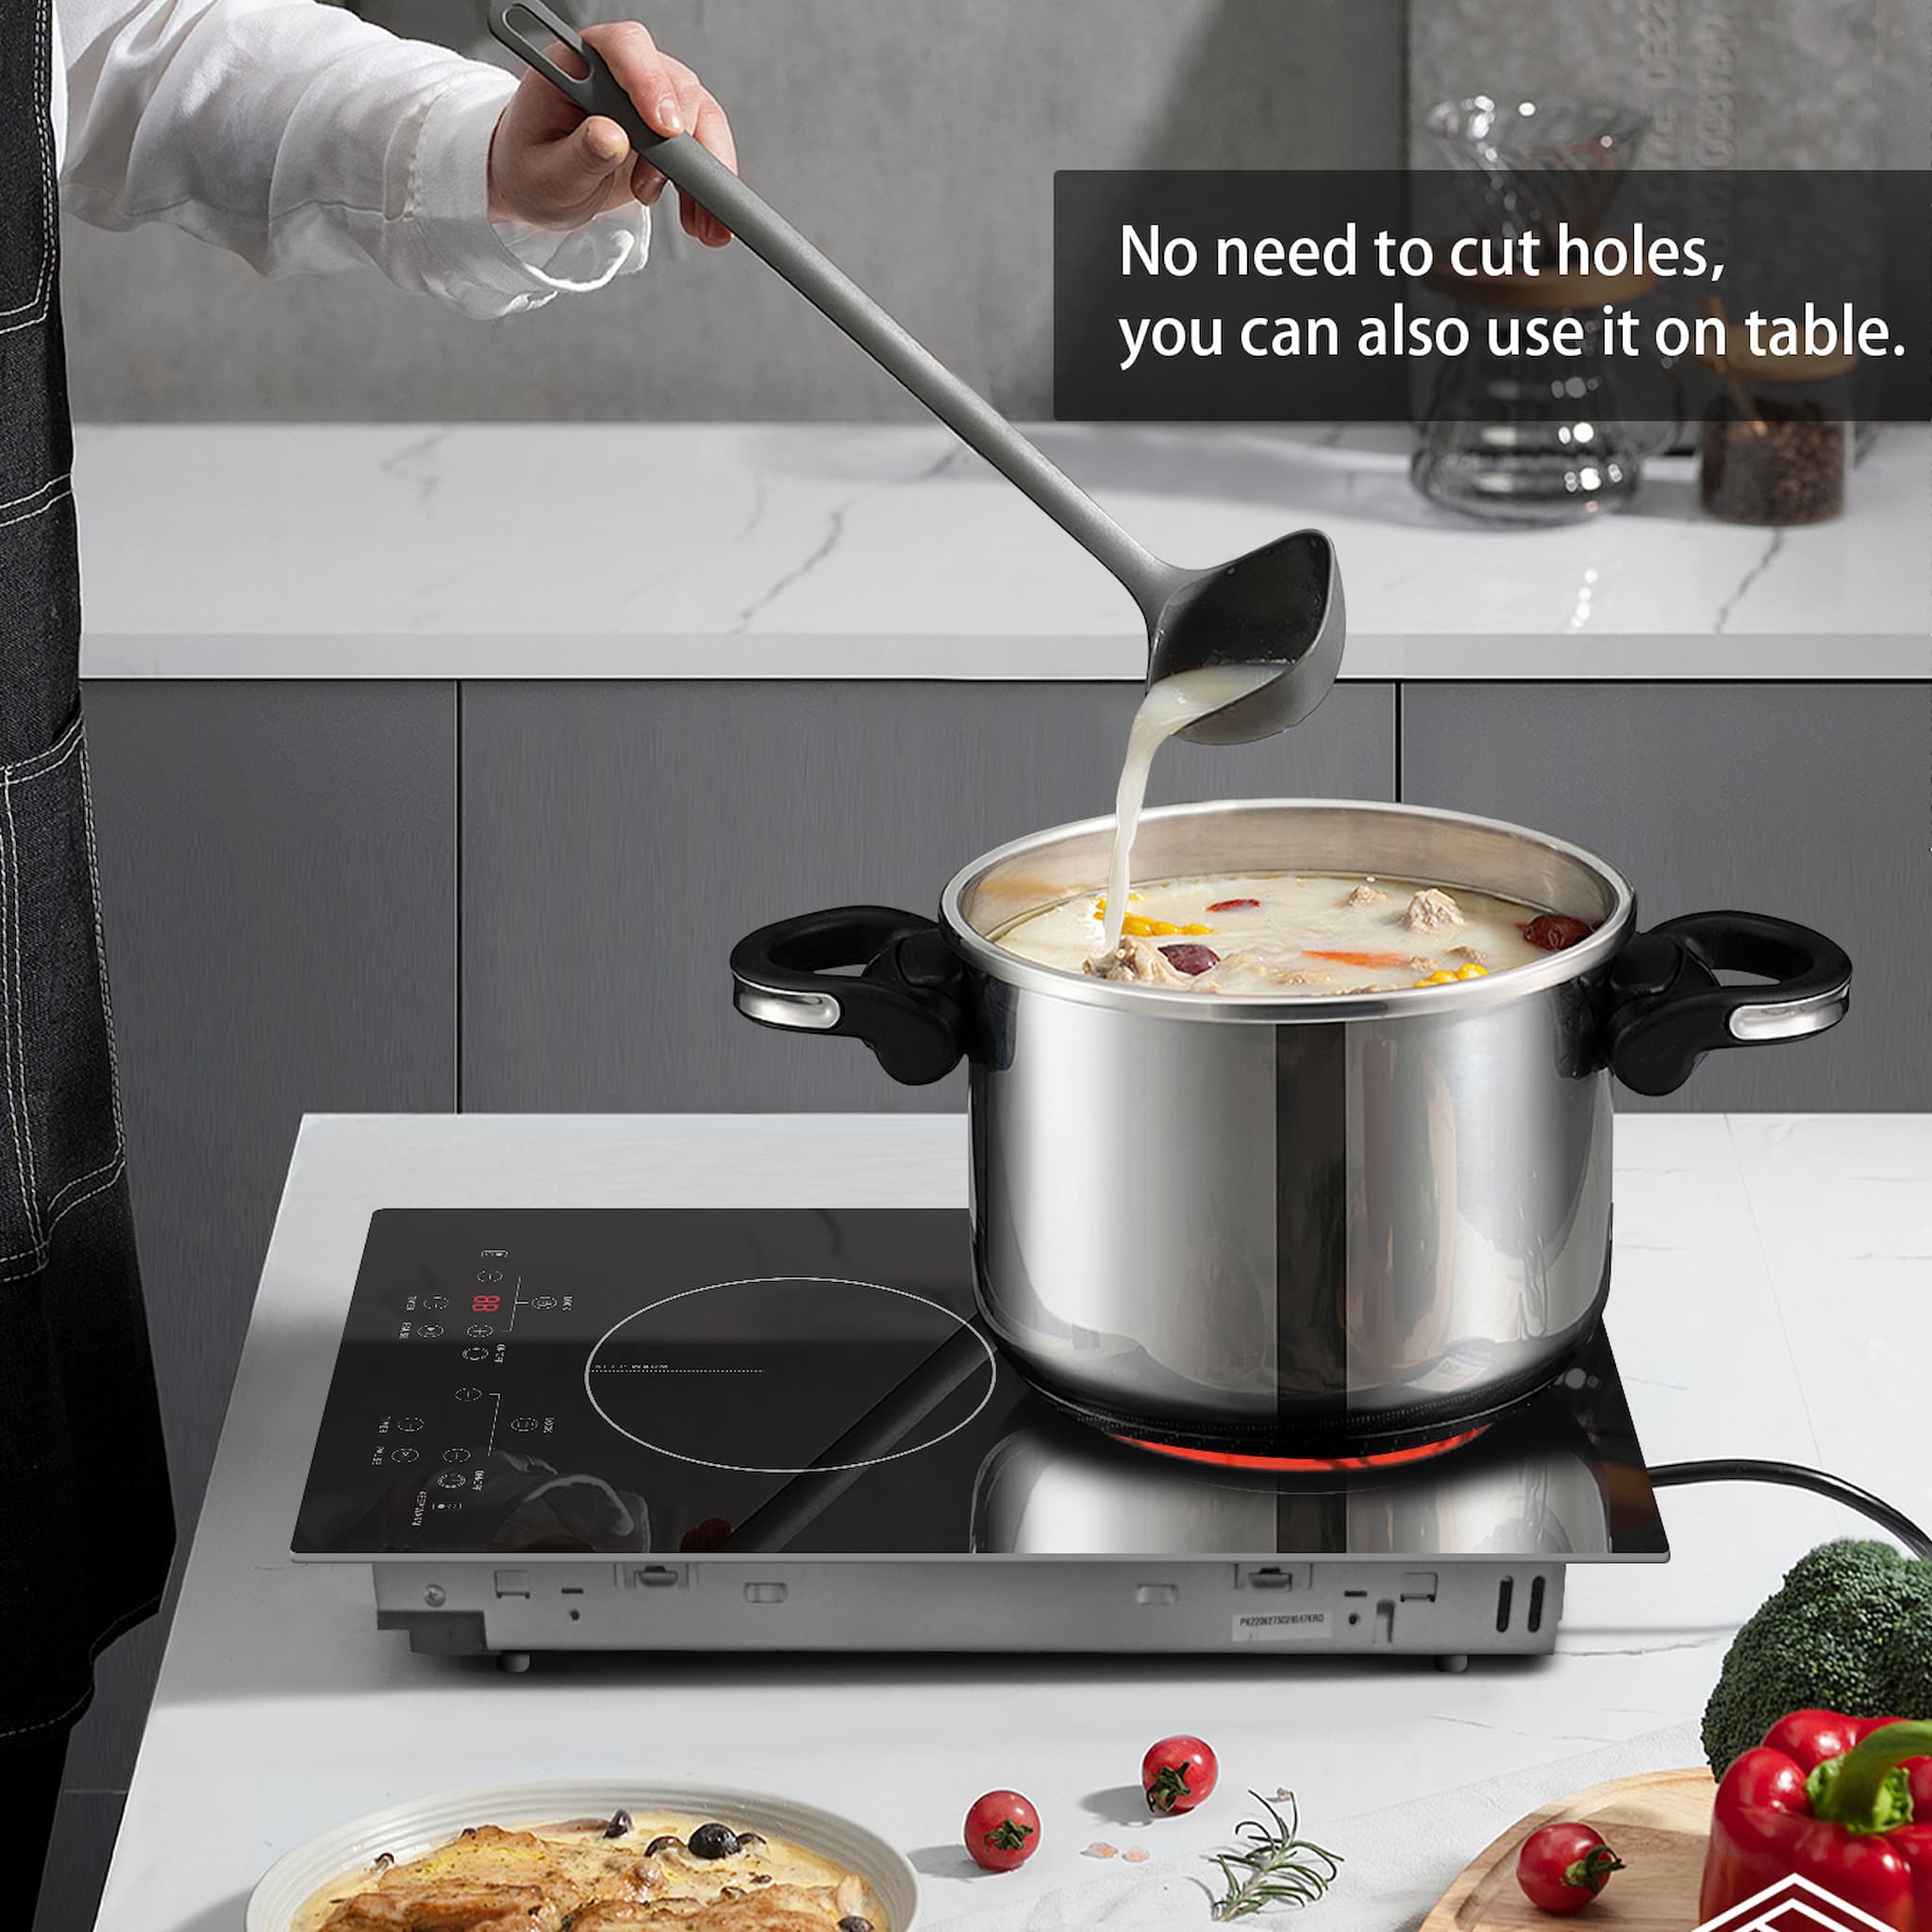 This 12 inch electric cooktop comes with a plug so you don't require an electrician to wire it. The plug in cooktop is suitable for 110-120v, which can be perfectly used in all American households. It's a built-in electric cooktop, but you can also use it on the countertop for it has 4 bottom brackets. Because it has plug and brackets, you can move it anywhere to use, very convenient.